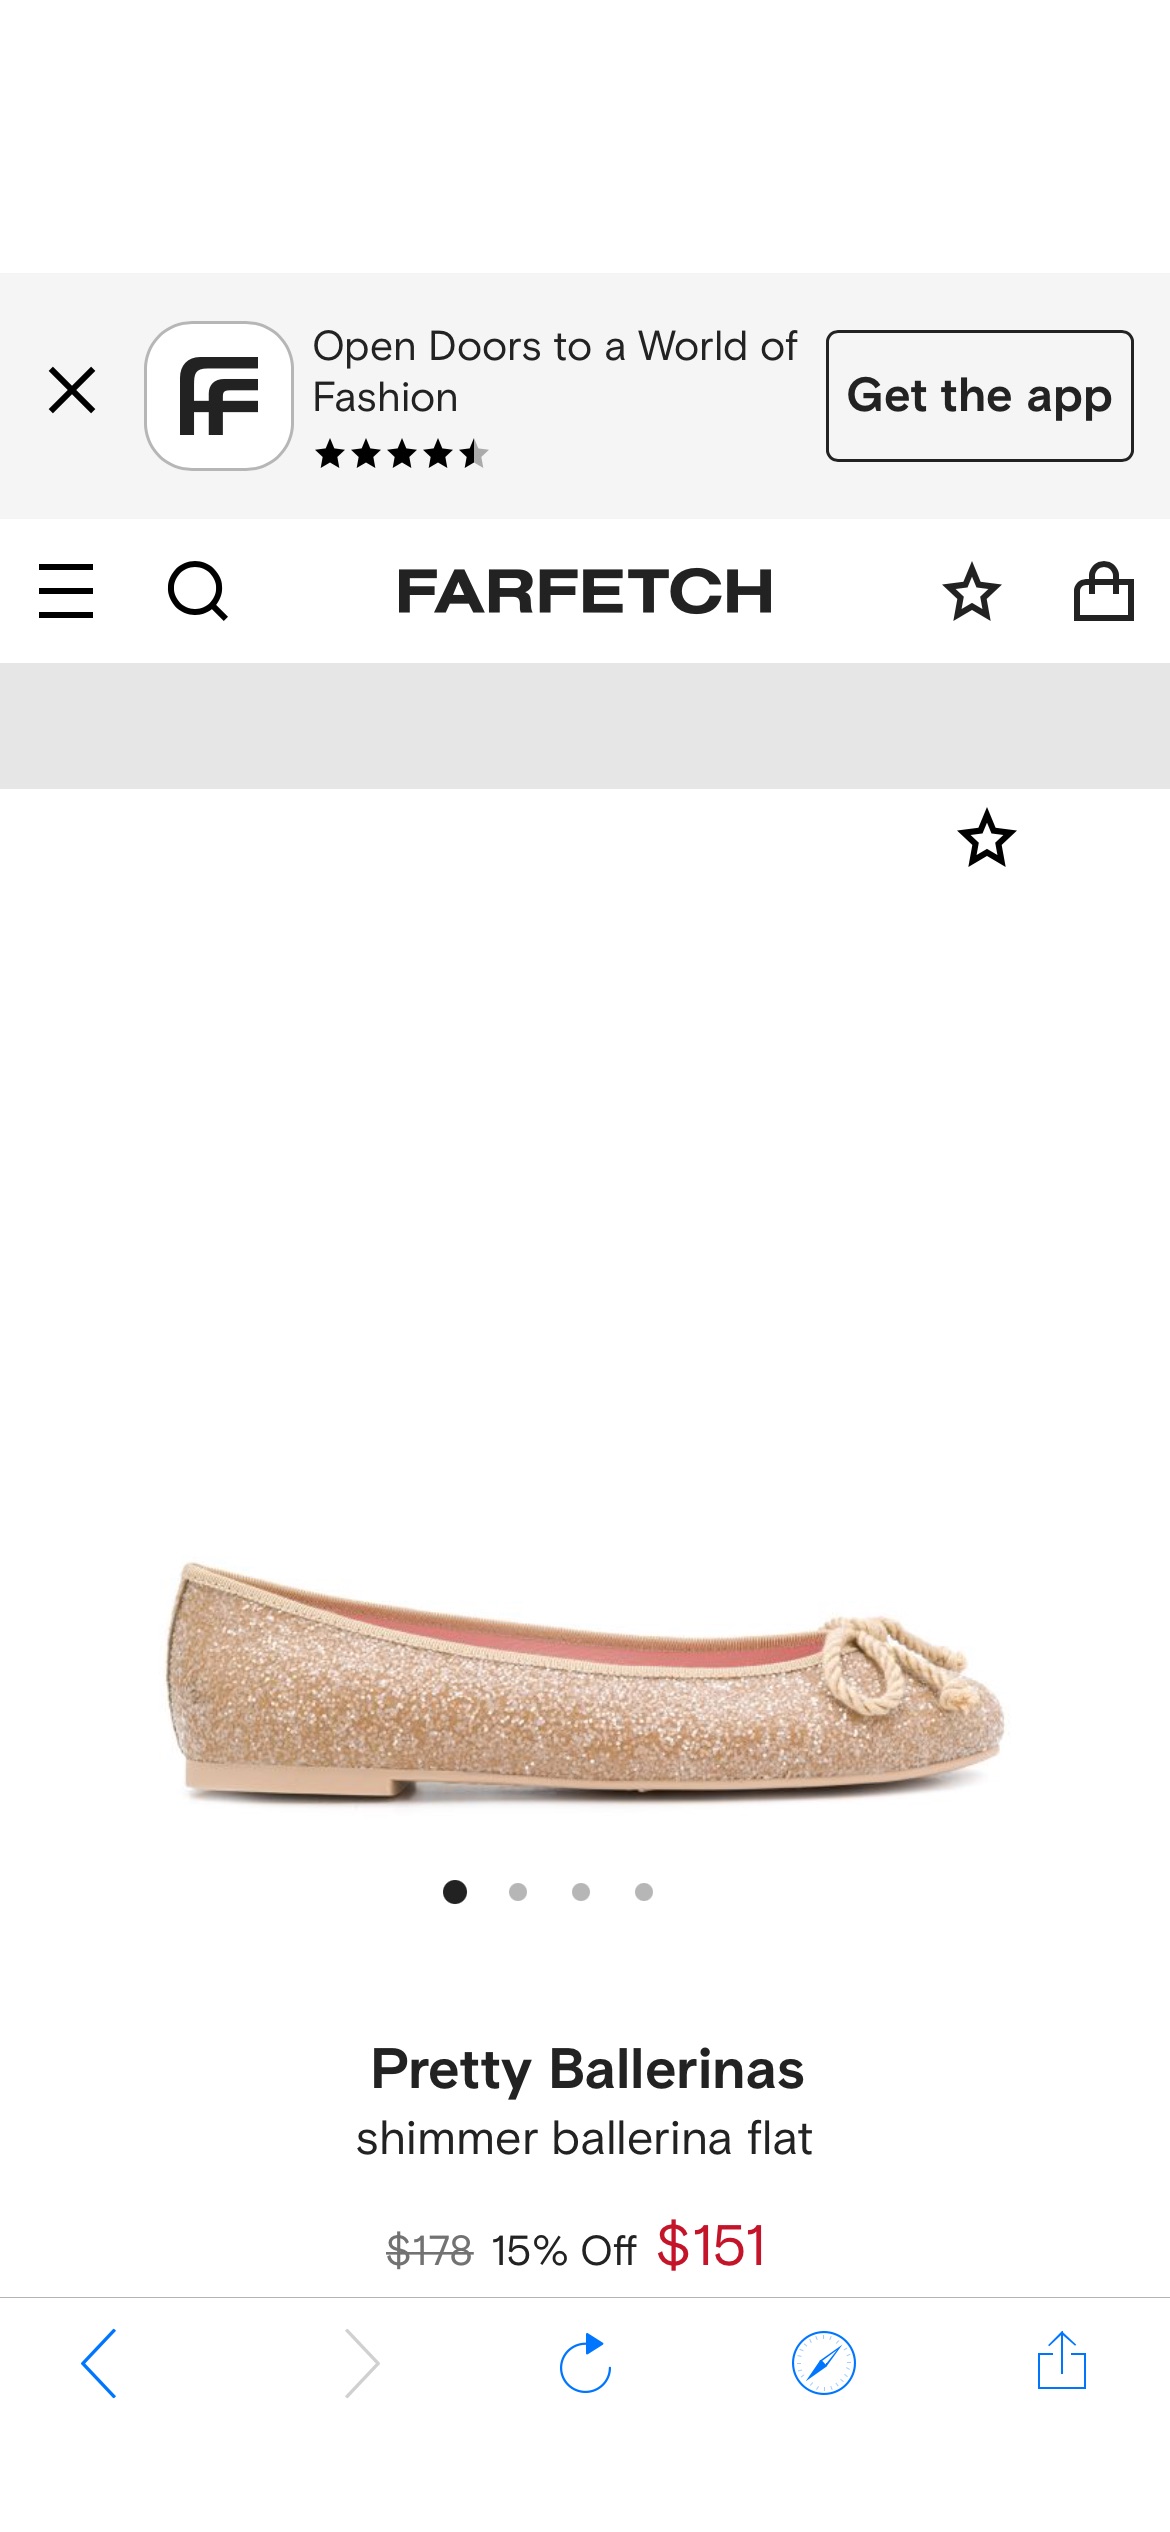 Shop Pretty Ballerinas shimmer ballerina flat with Express Delivery - Farfetch 芭蕾舞鞋